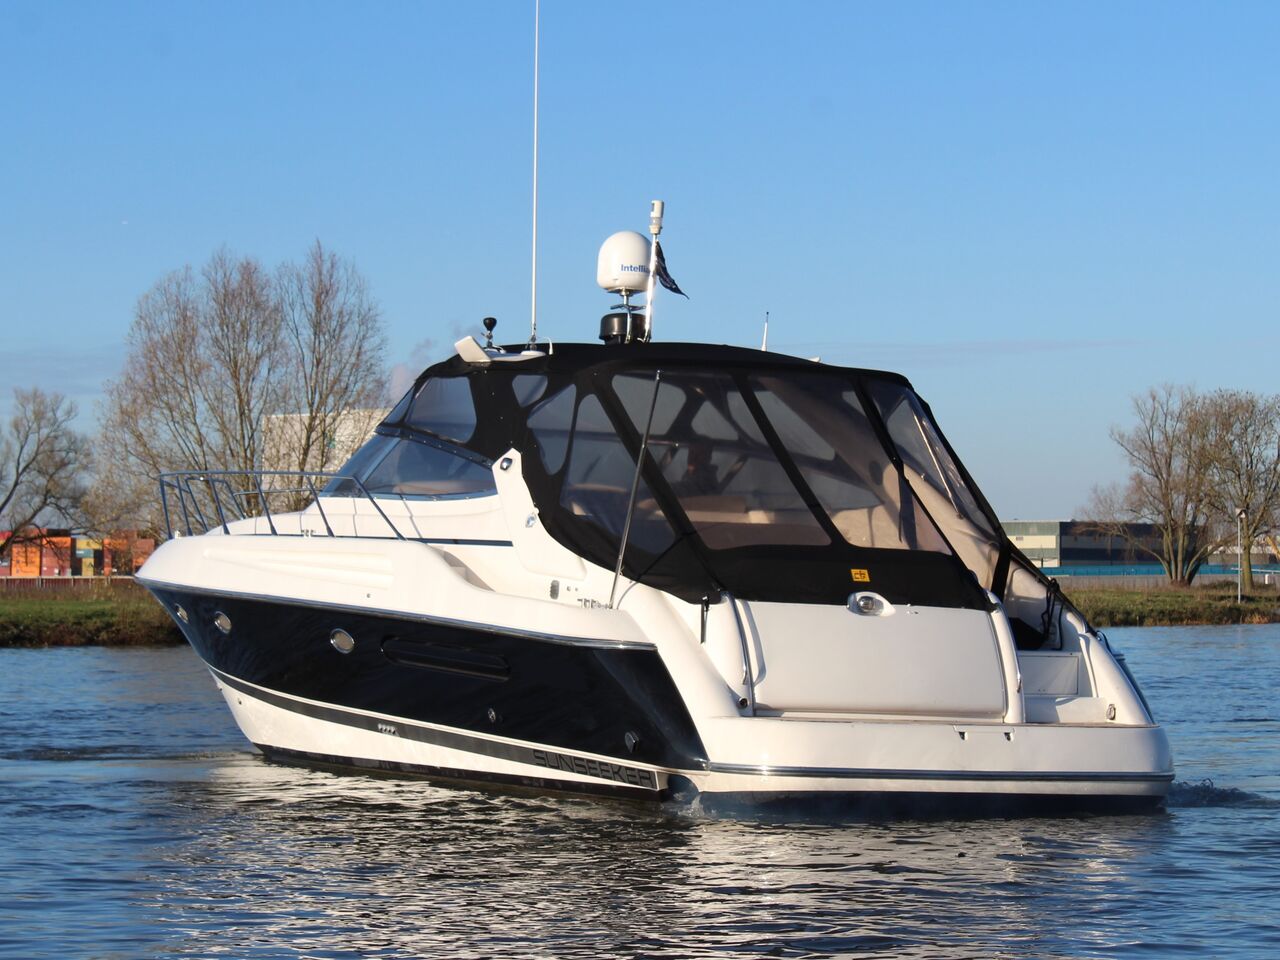 Sunseeker Camargue 47 - picture 2